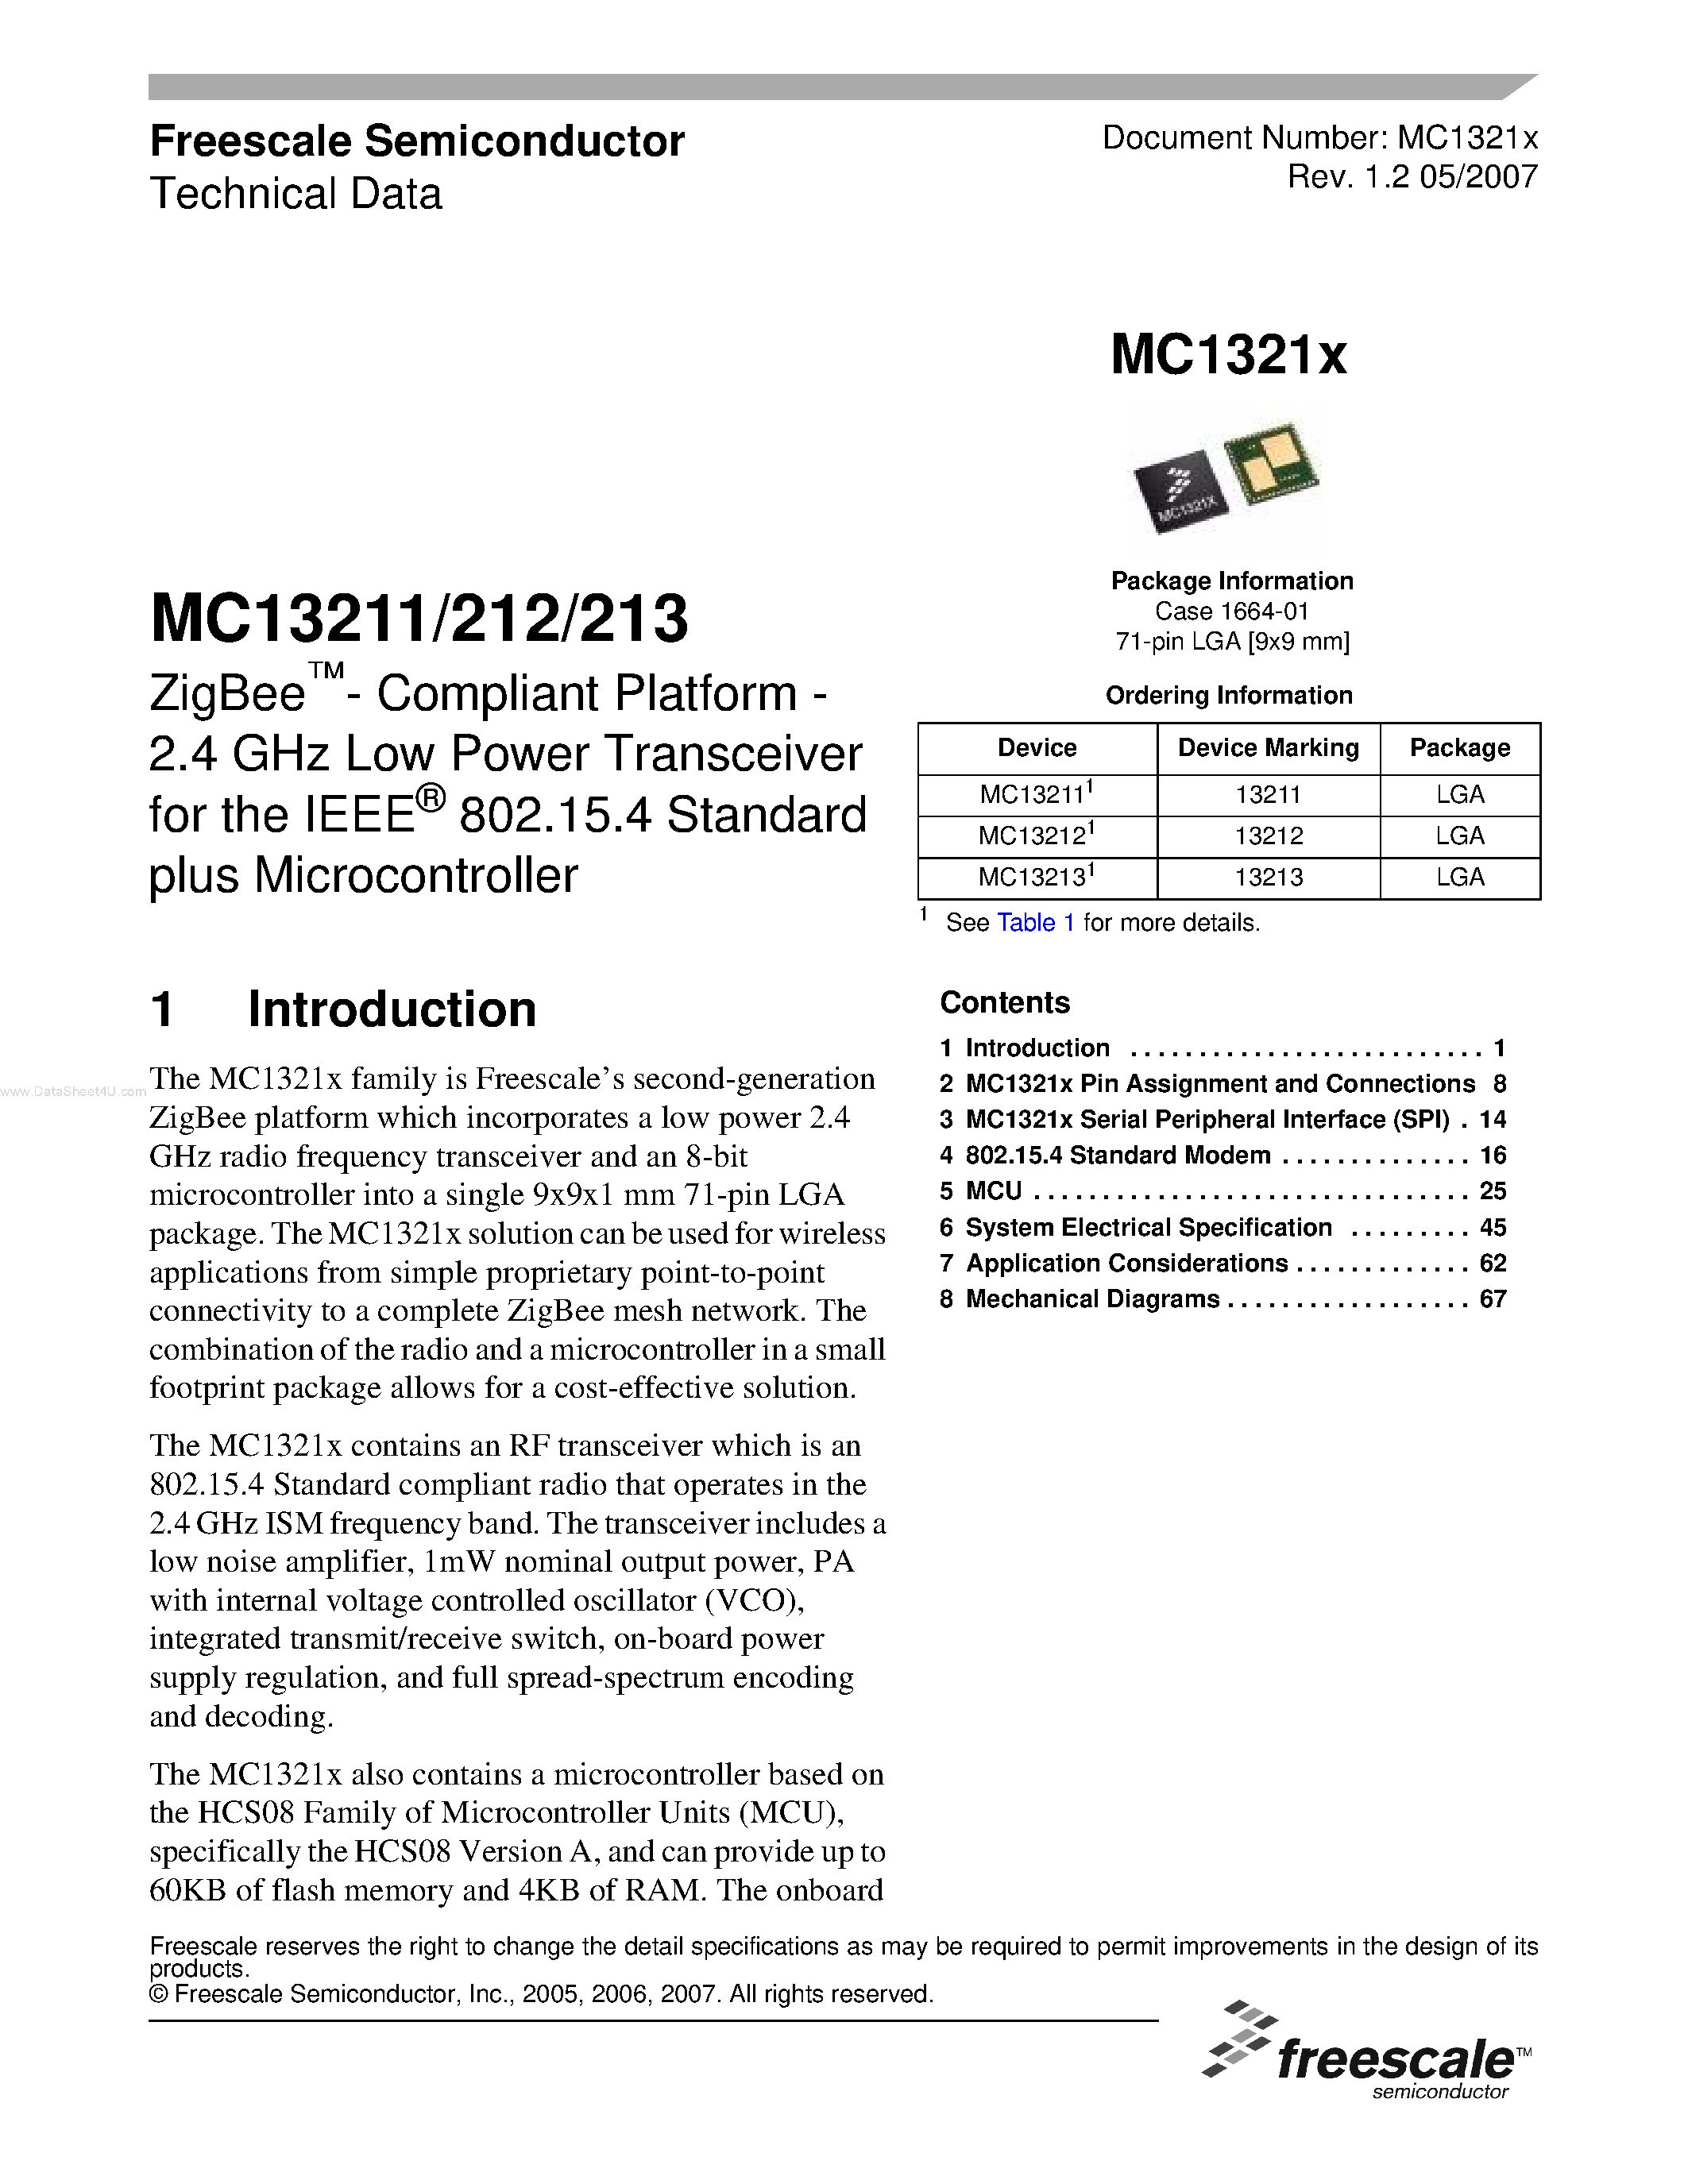 Datasheet MC13211 - 2.4 GHz Low Power Transceiver page 1